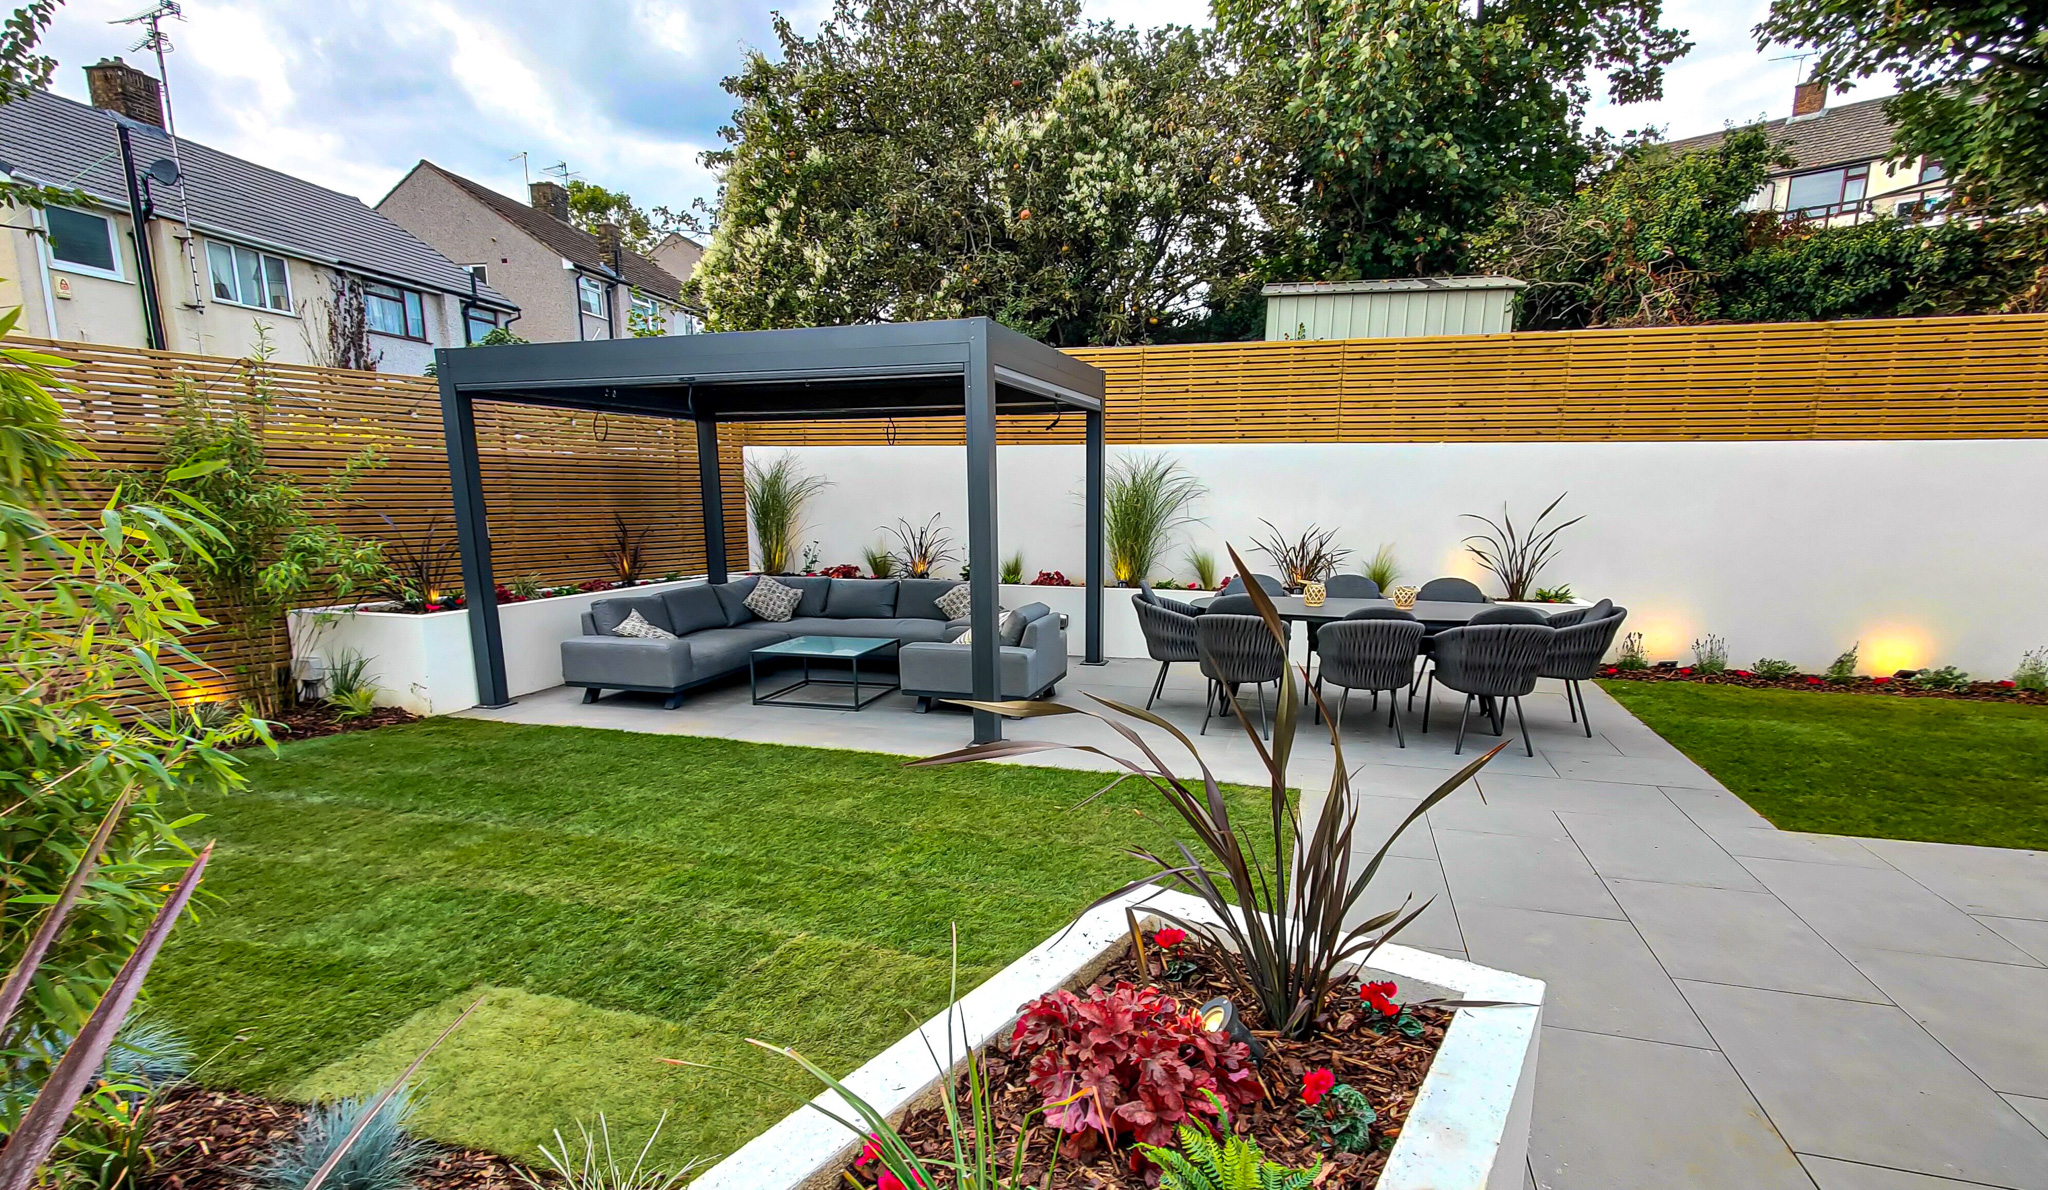 Bromley family garden with raised beds, patio, pergola and slatted fencing